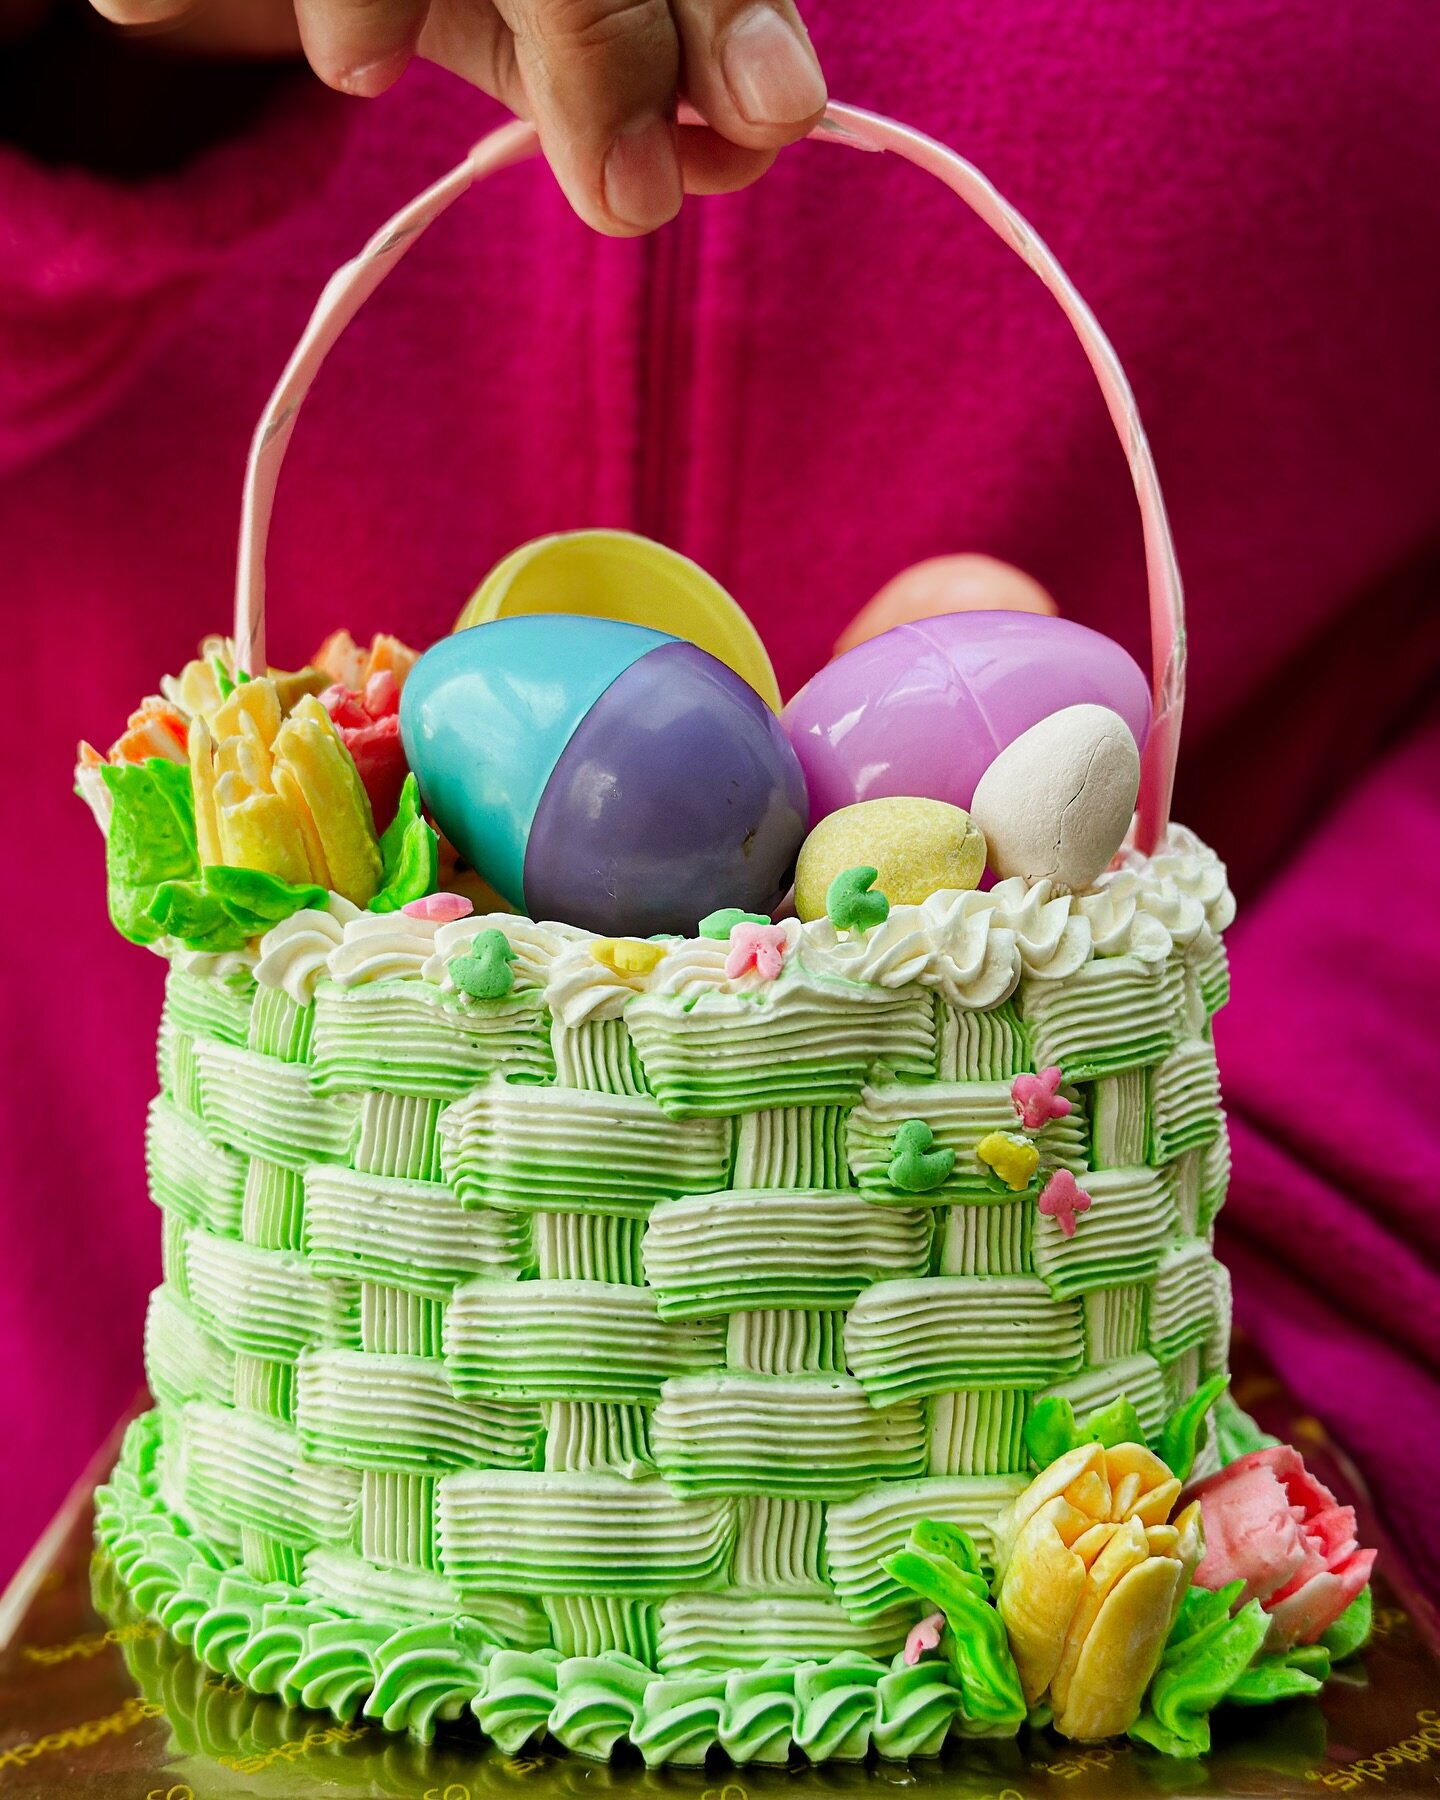 Hop into Easter with our adorable Easter Egg Basket cakes! 🐰 🥚 🍰 perfect for adding a touch of Easter joy to your celebrations! 🌹 #goldilockscanada #kumainkanaba #easter #eastereggs